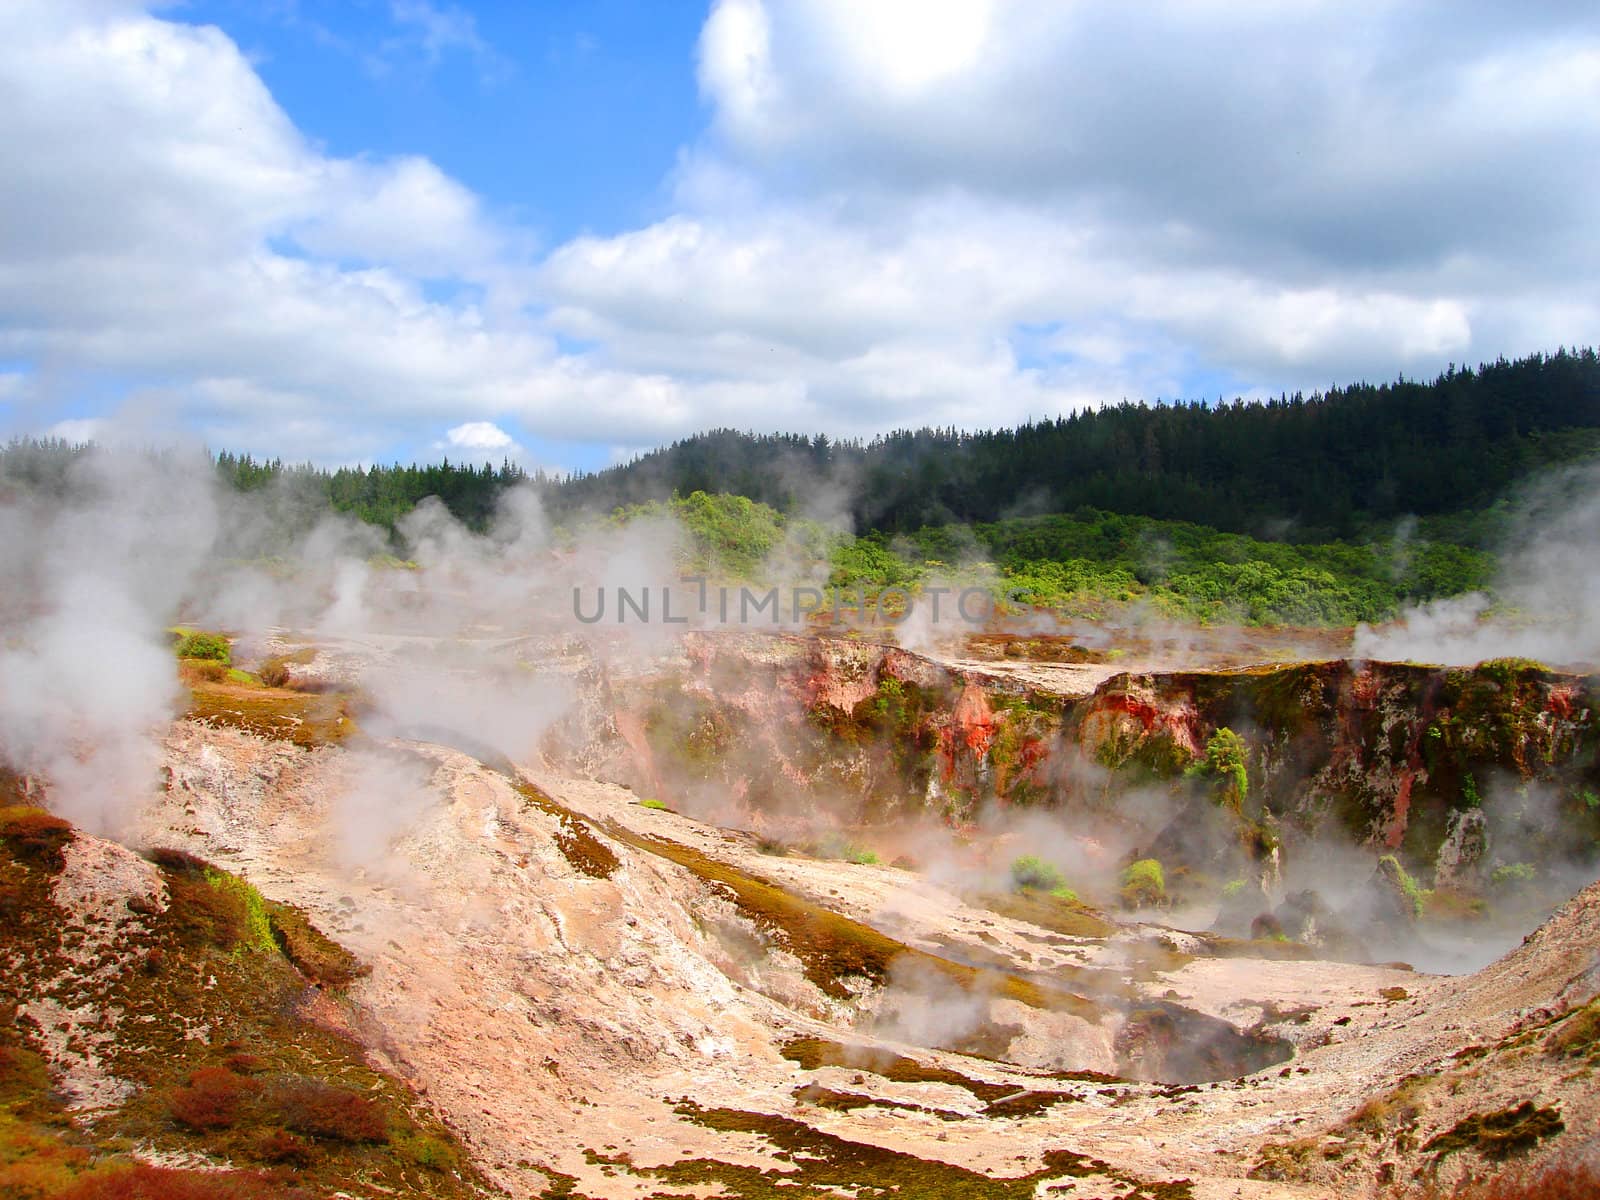 Geothermal Activity of Hell's Gate (between Rotorua and Taupo), New Zealand